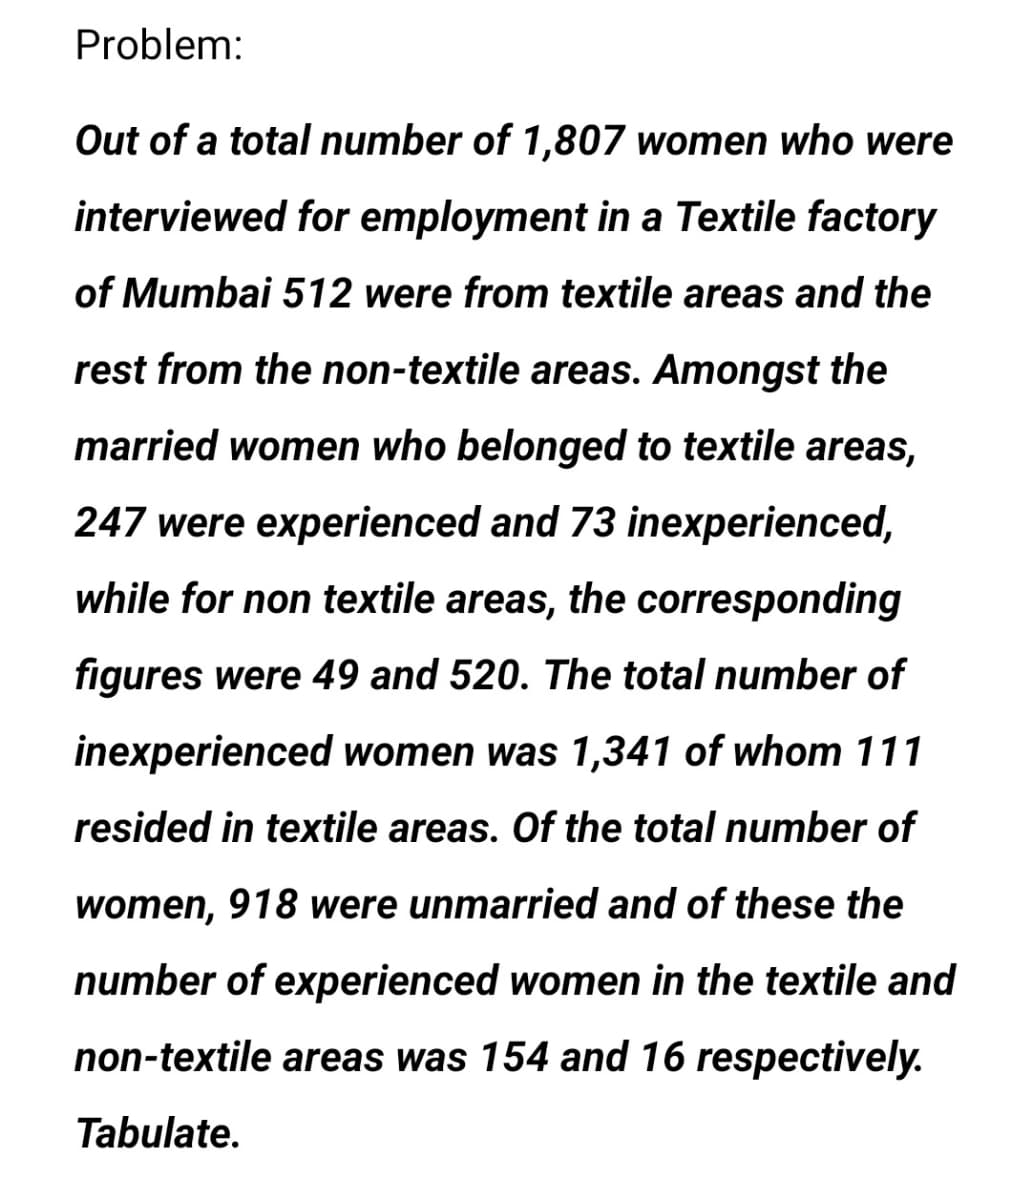 Problem:
Out of a total number of 1,807 women who were
interviewed for employment in a Textile factory
of Mumbai 512 were from textile areas and the
rest from the non-textile areas. Amongst the
married women who belonged to textile areas,
247 were experienced and 73 inexperienced,
while for non textile areas, the corresponding
figures were 49 and 520. The total number of
inexperienced women was 1,341 of whom 111
resided in textile areas. Of the total number of
women, 918 were unmarried and of these the
number of experienced women in the textile and
non-textile areas was 154 and 16 respectively.
Tabulate.
